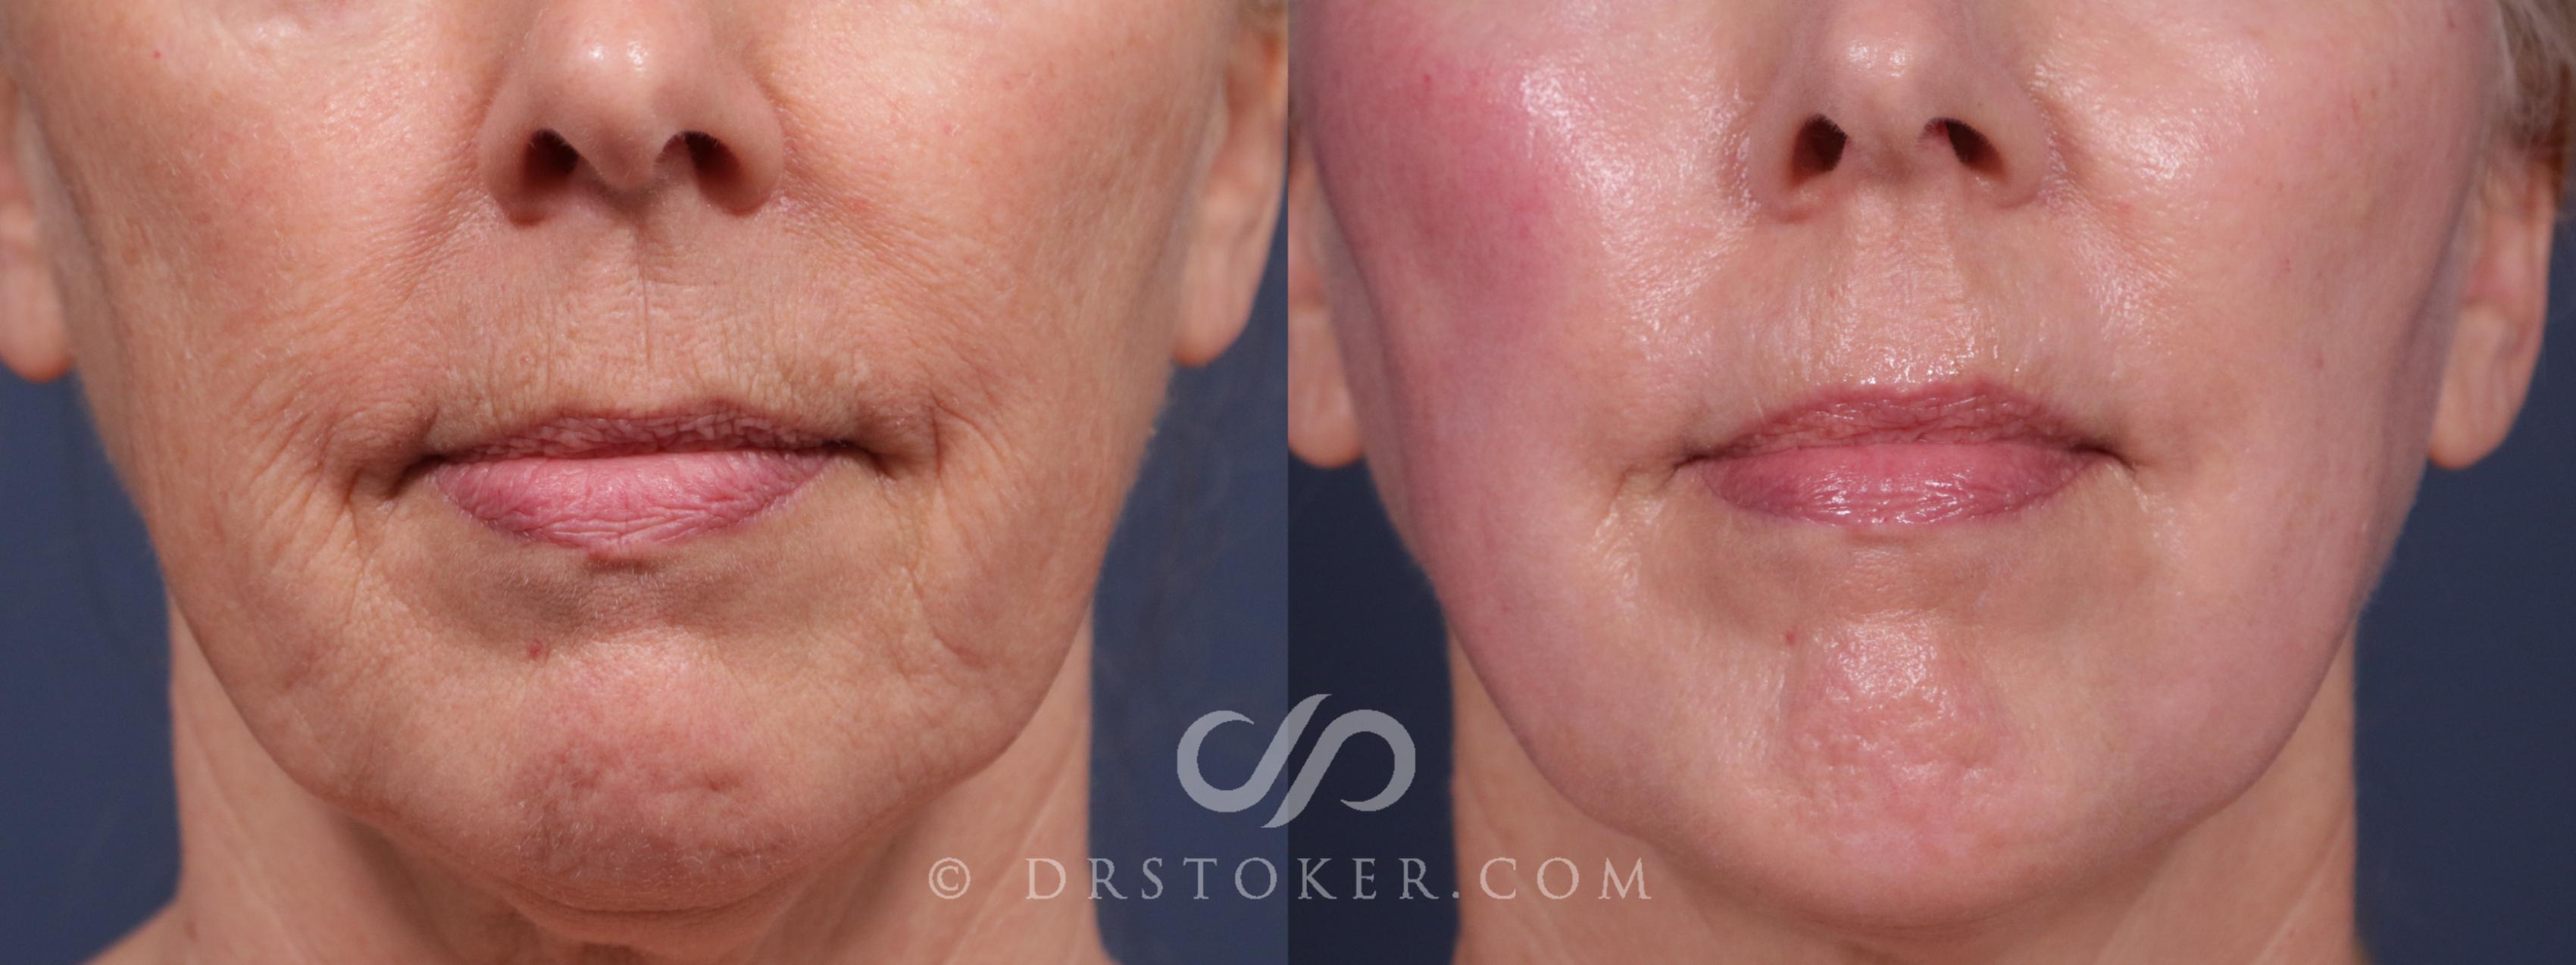 Before & After Laser Skin Resurfacing  Case 2189 Front View in Los Angeles, CA